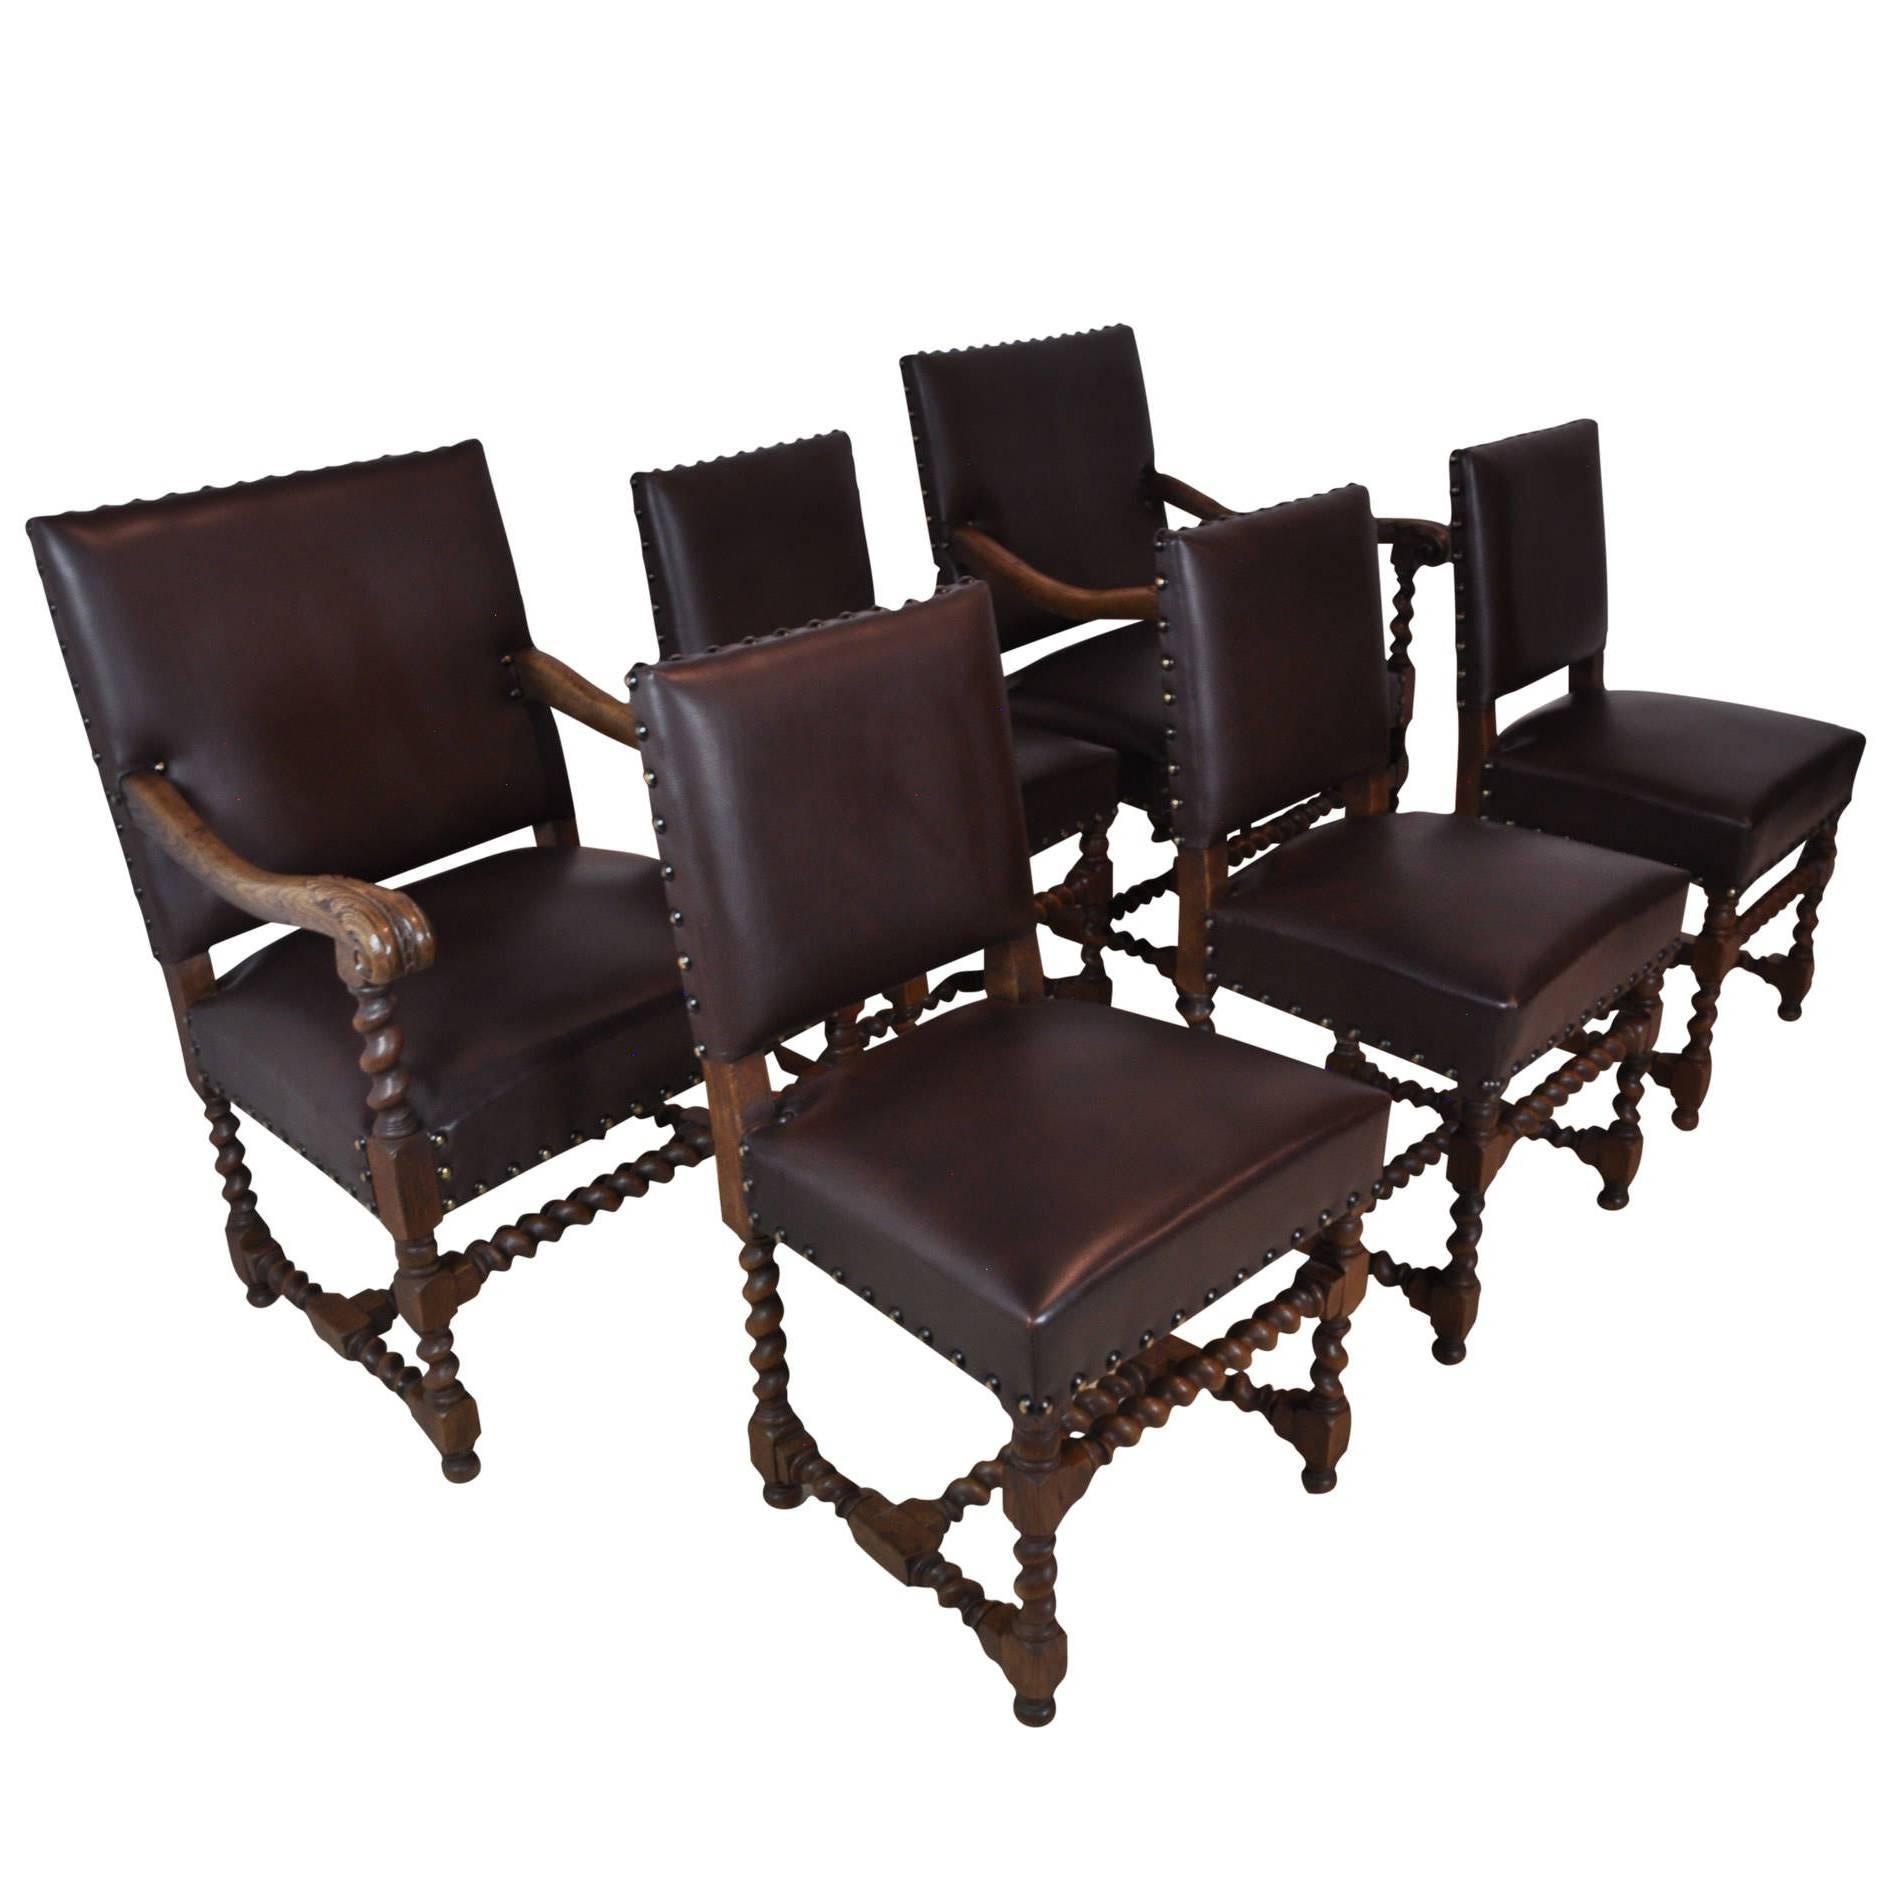 French Barley Twist Chairs with Leather, Set of Six, circa 1910, 'Reupholstered'